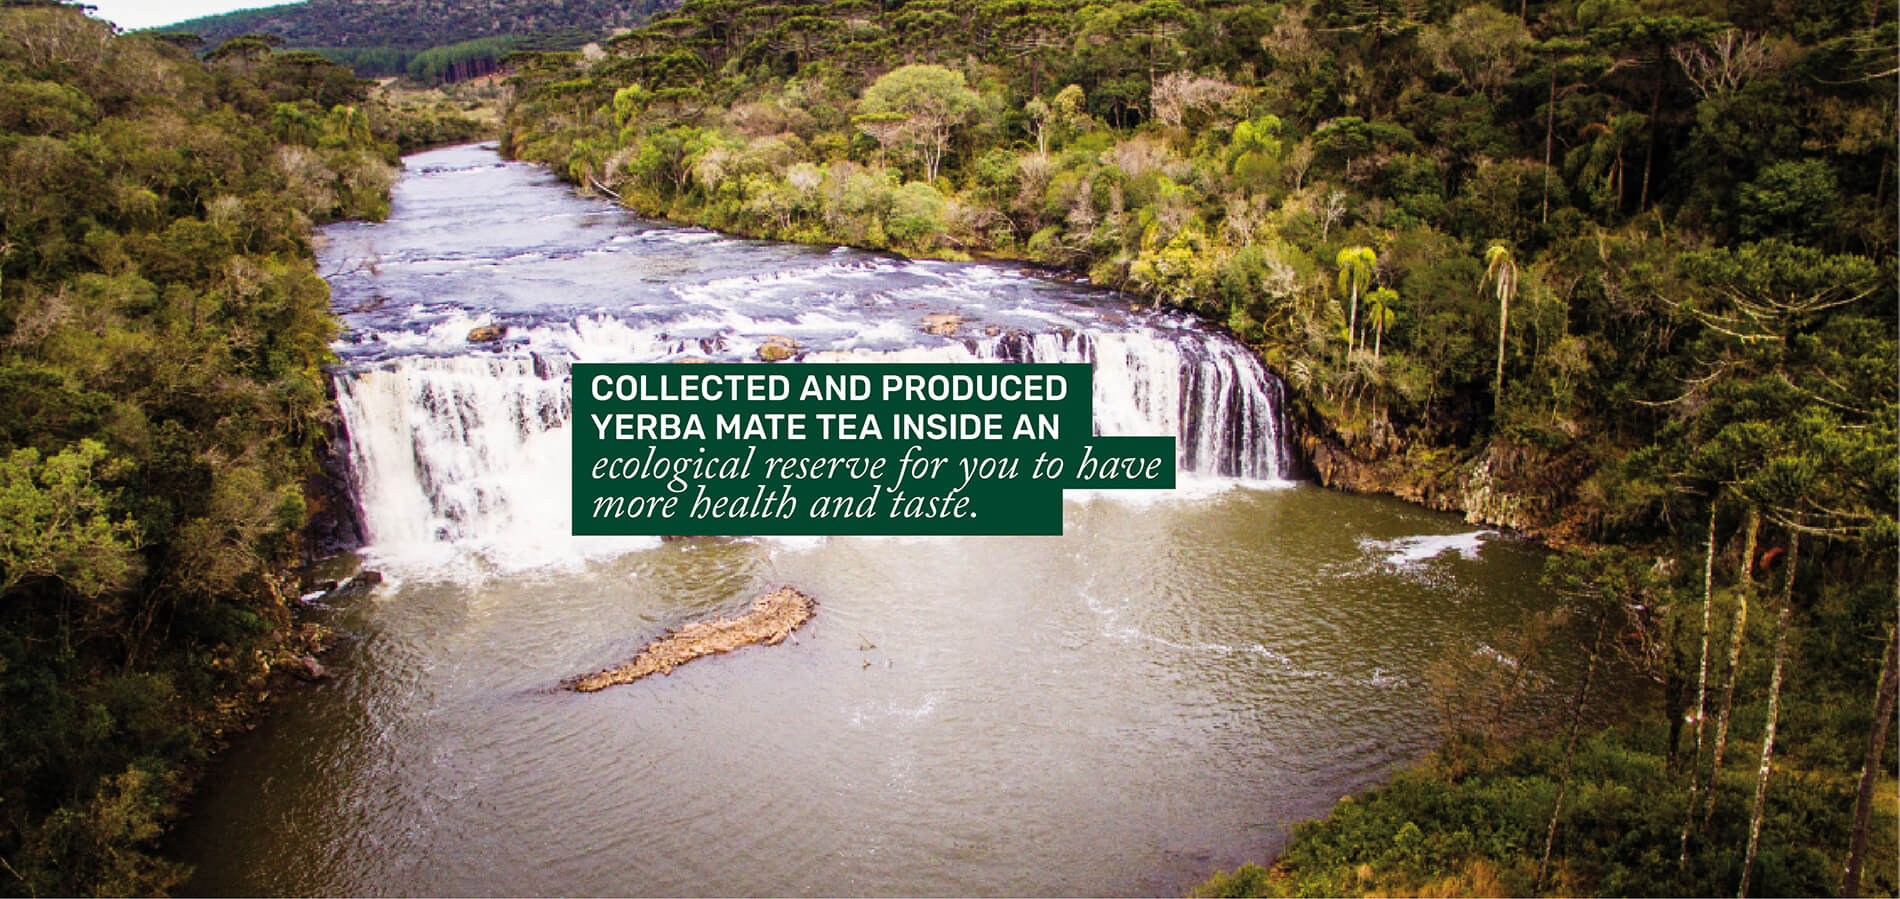 Yerba mate produced and harvested within an ecological reserve